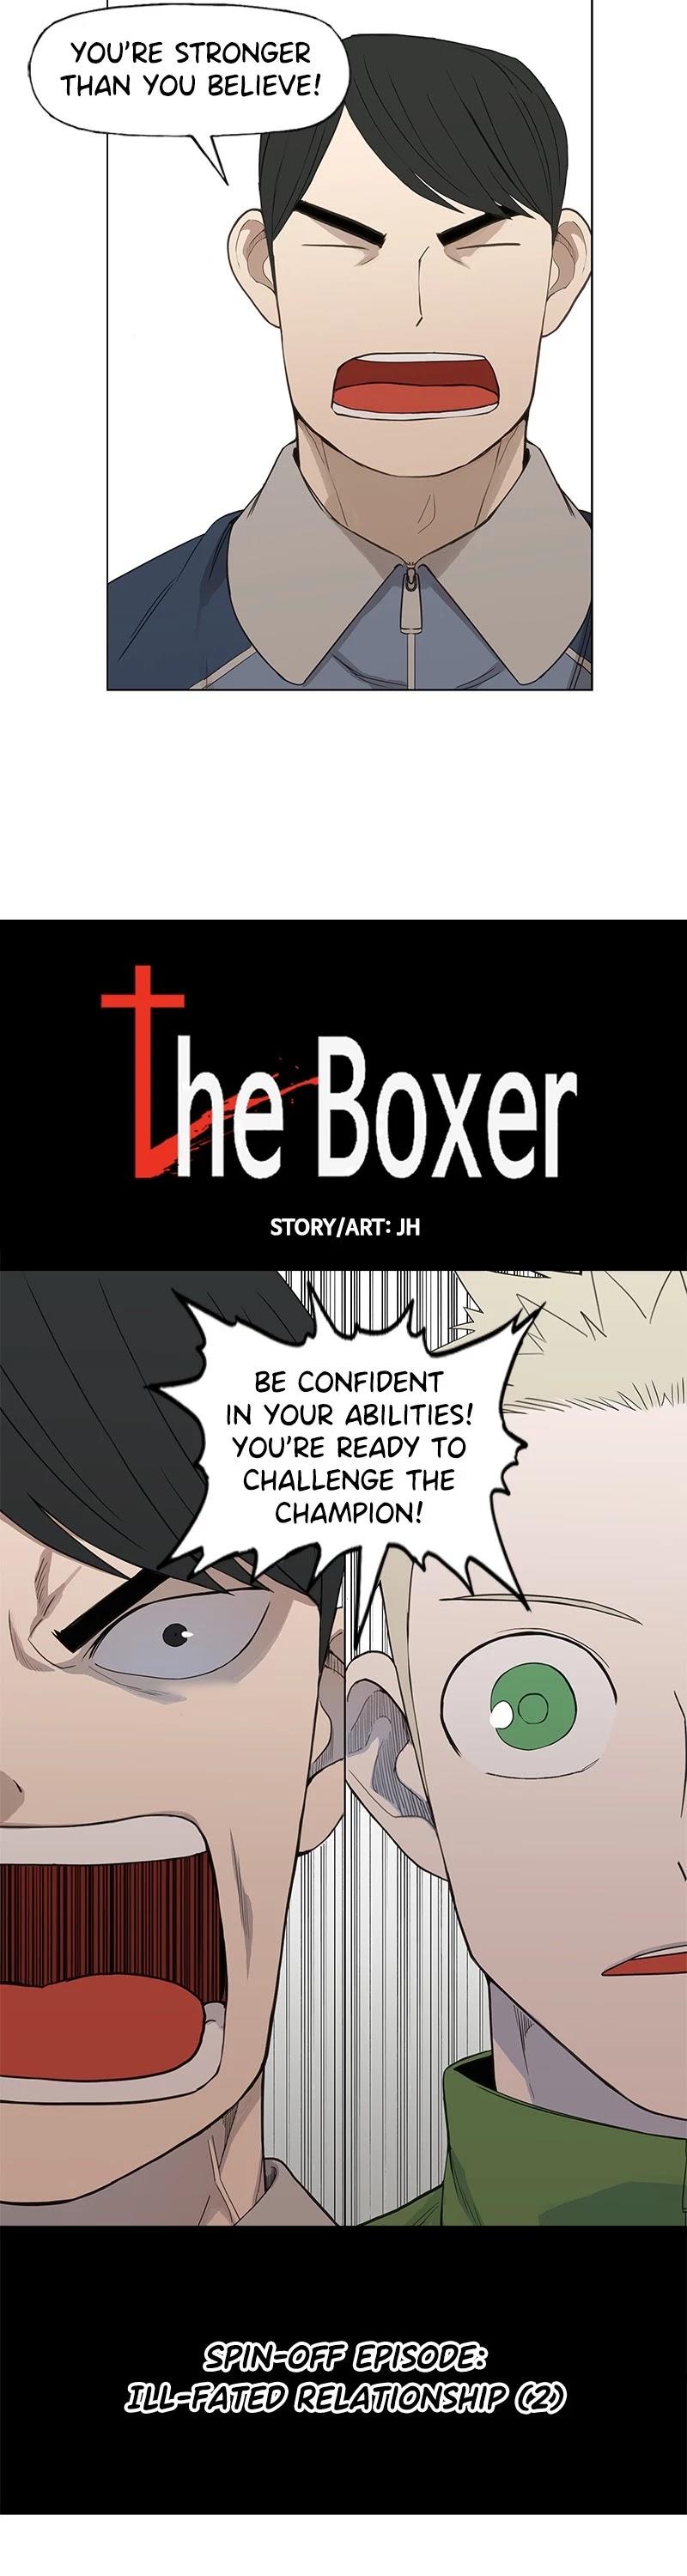 The Boxer Chapter 116: Ep. 106 - Ill-Fated Relationship (2) (Spin-Off #2) page 4 - 